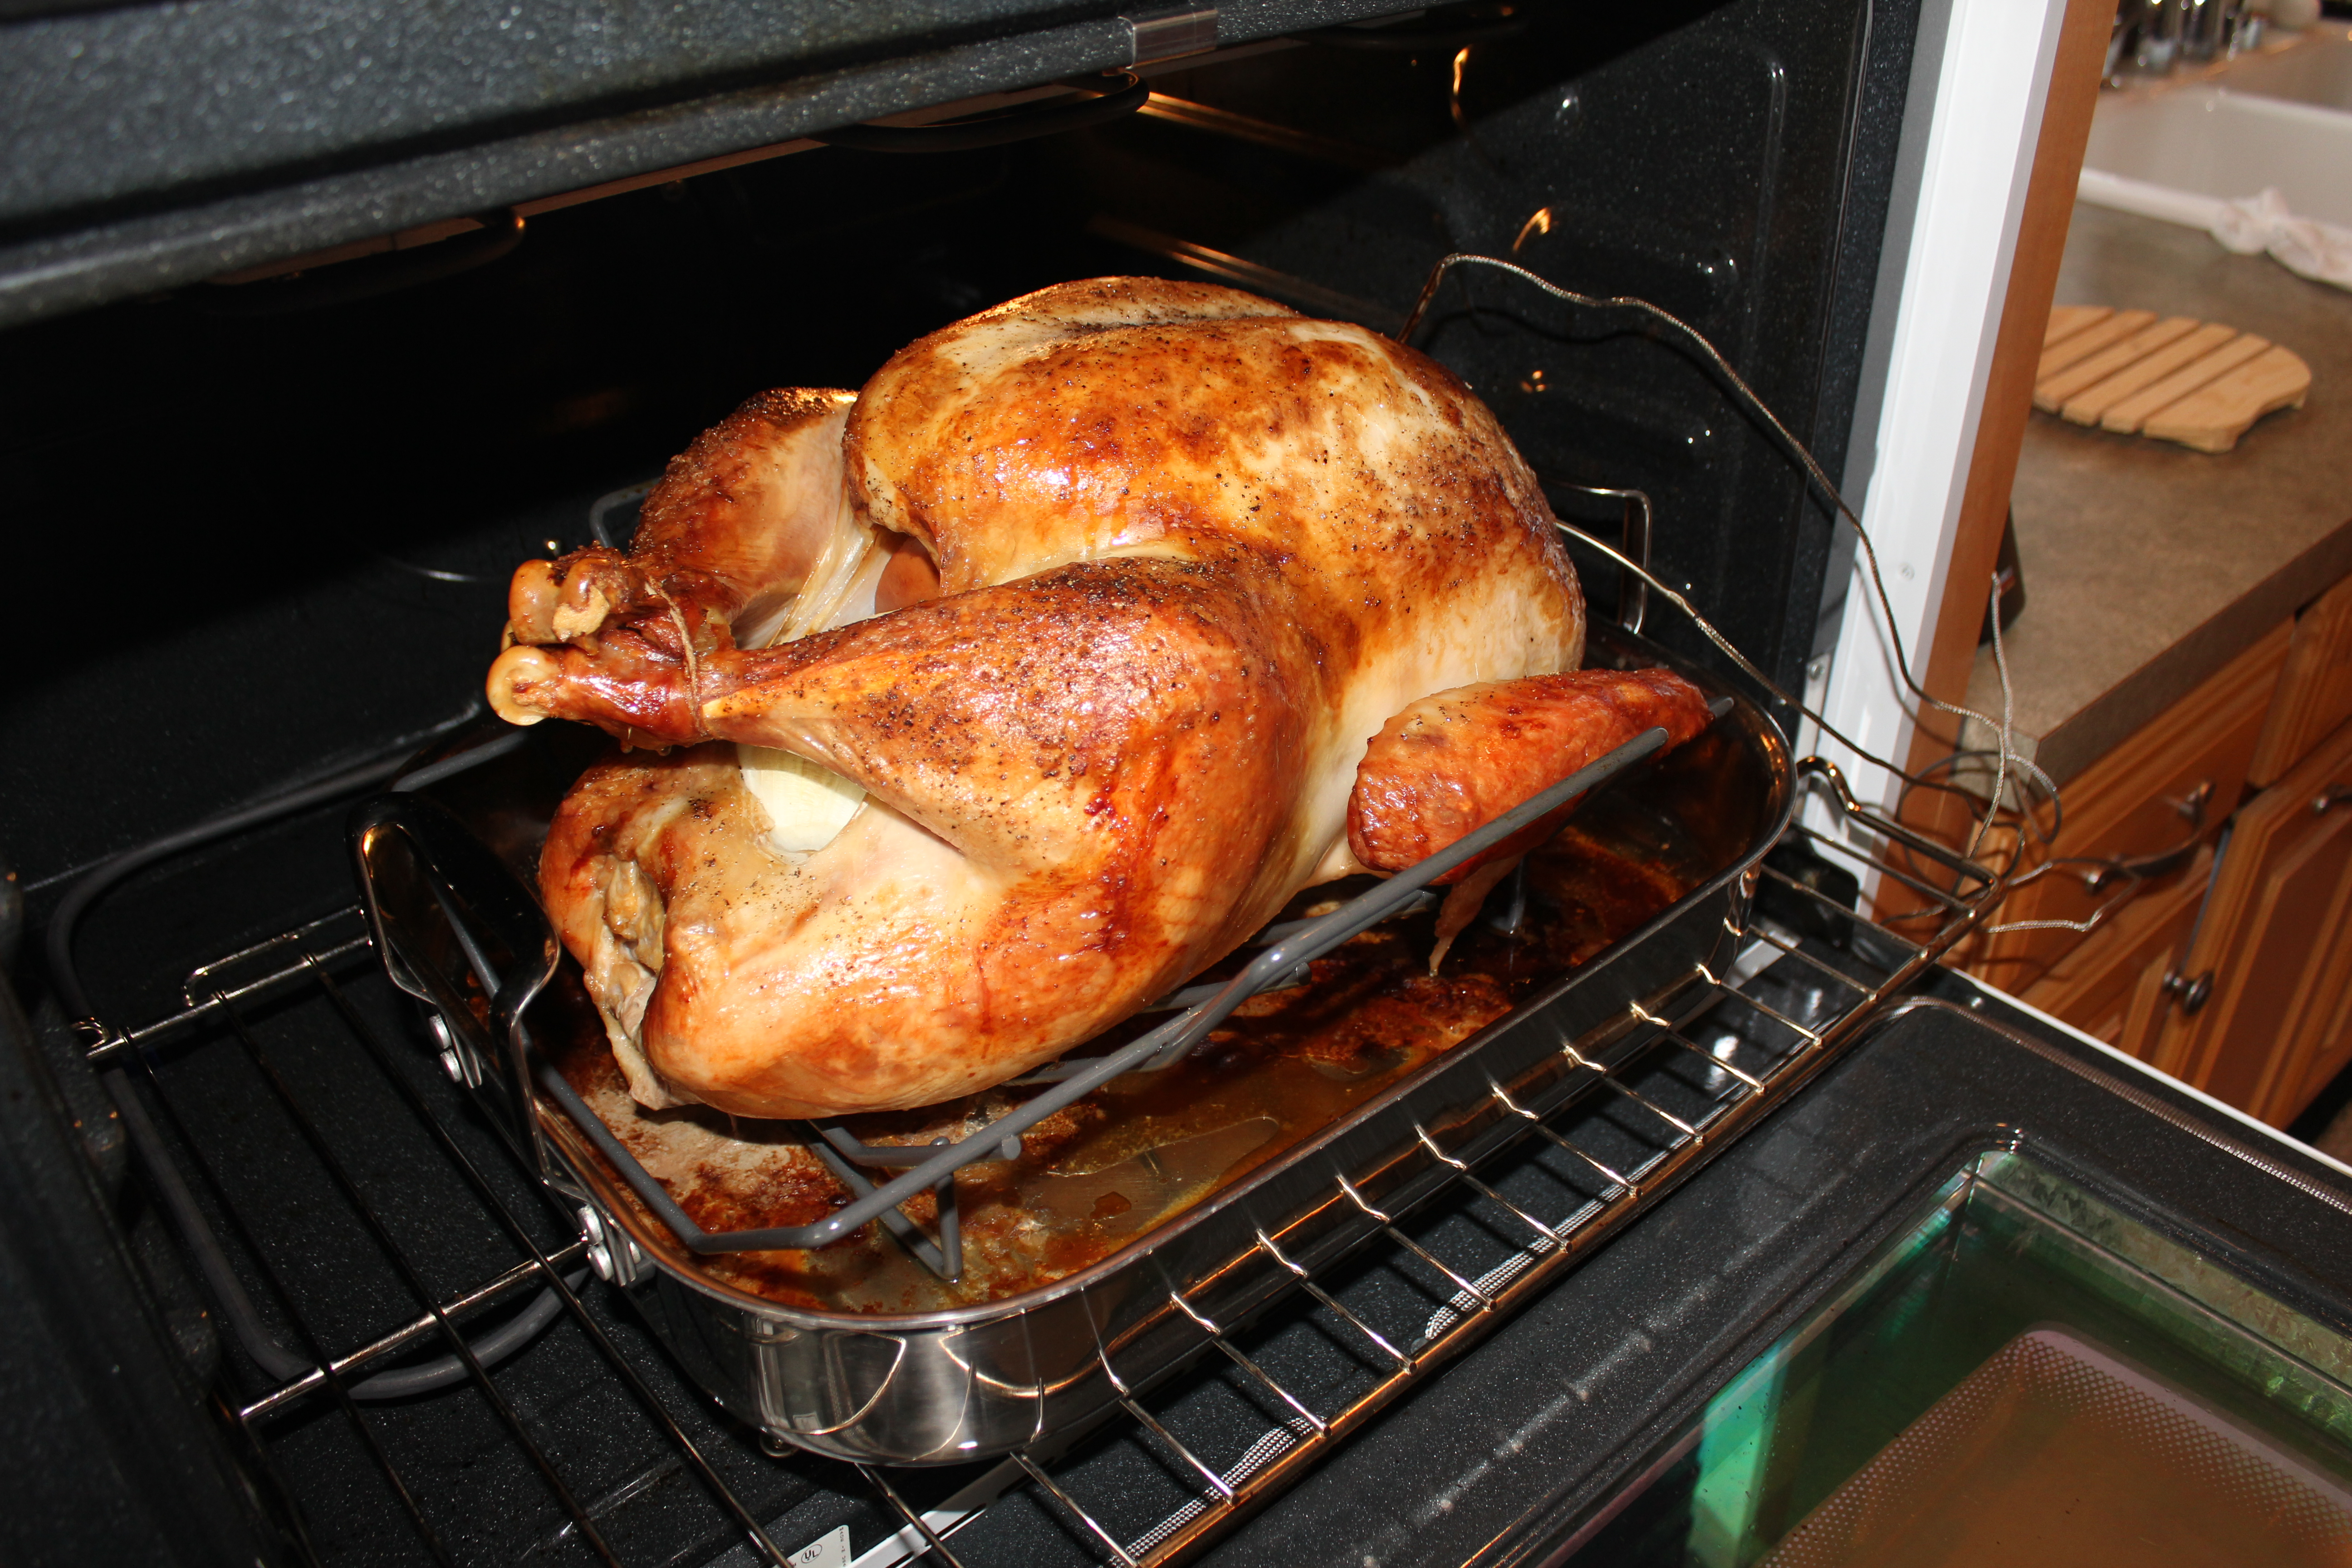 A perfectly golden-baked turkey in the oven.